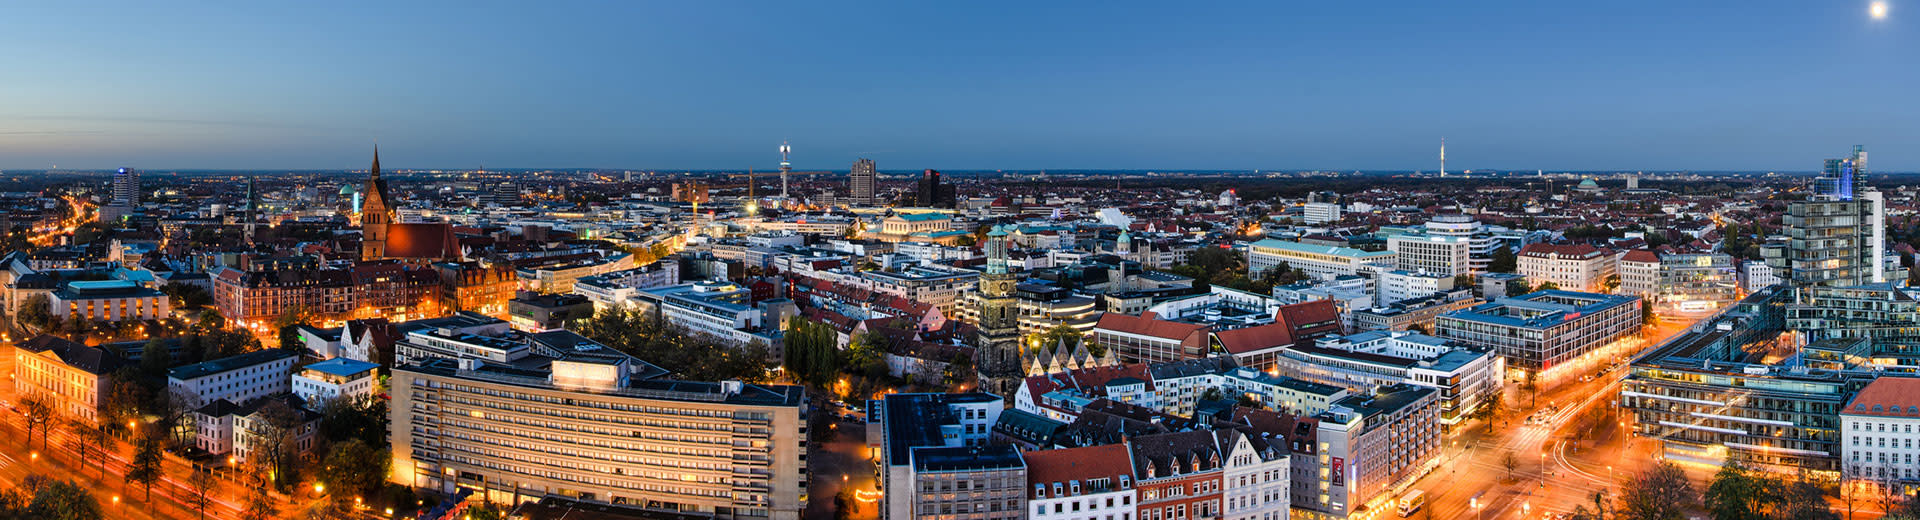 An aerial viw of Hanover at night, with a combination of old and new buildings.